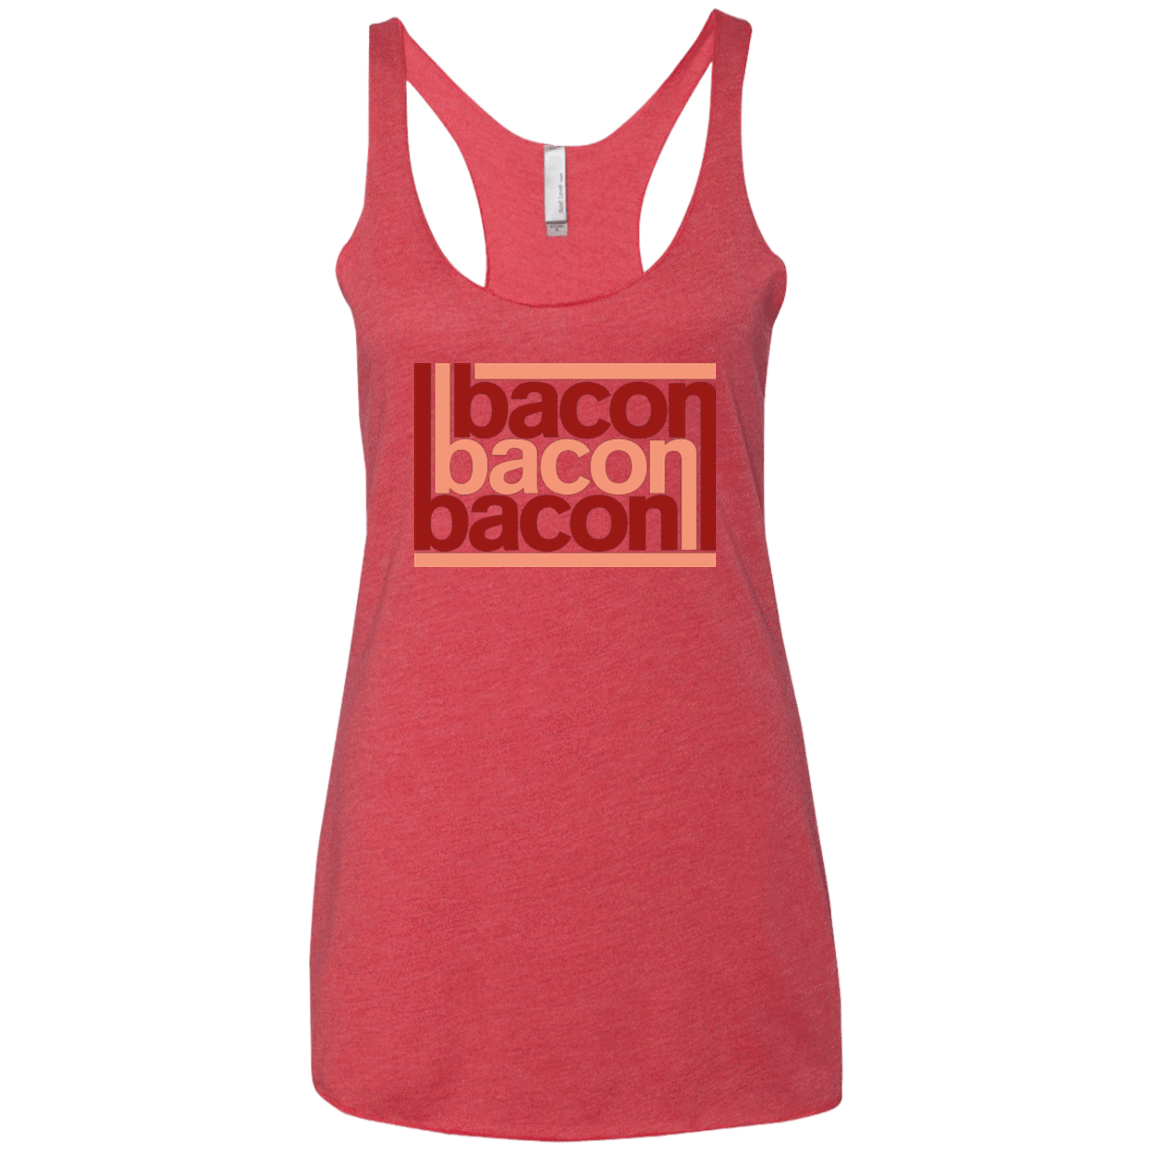 T-Shirts Vintage Red / X-Small Bacon-Bacon-Bacon Women's Triblend Racerback Tank